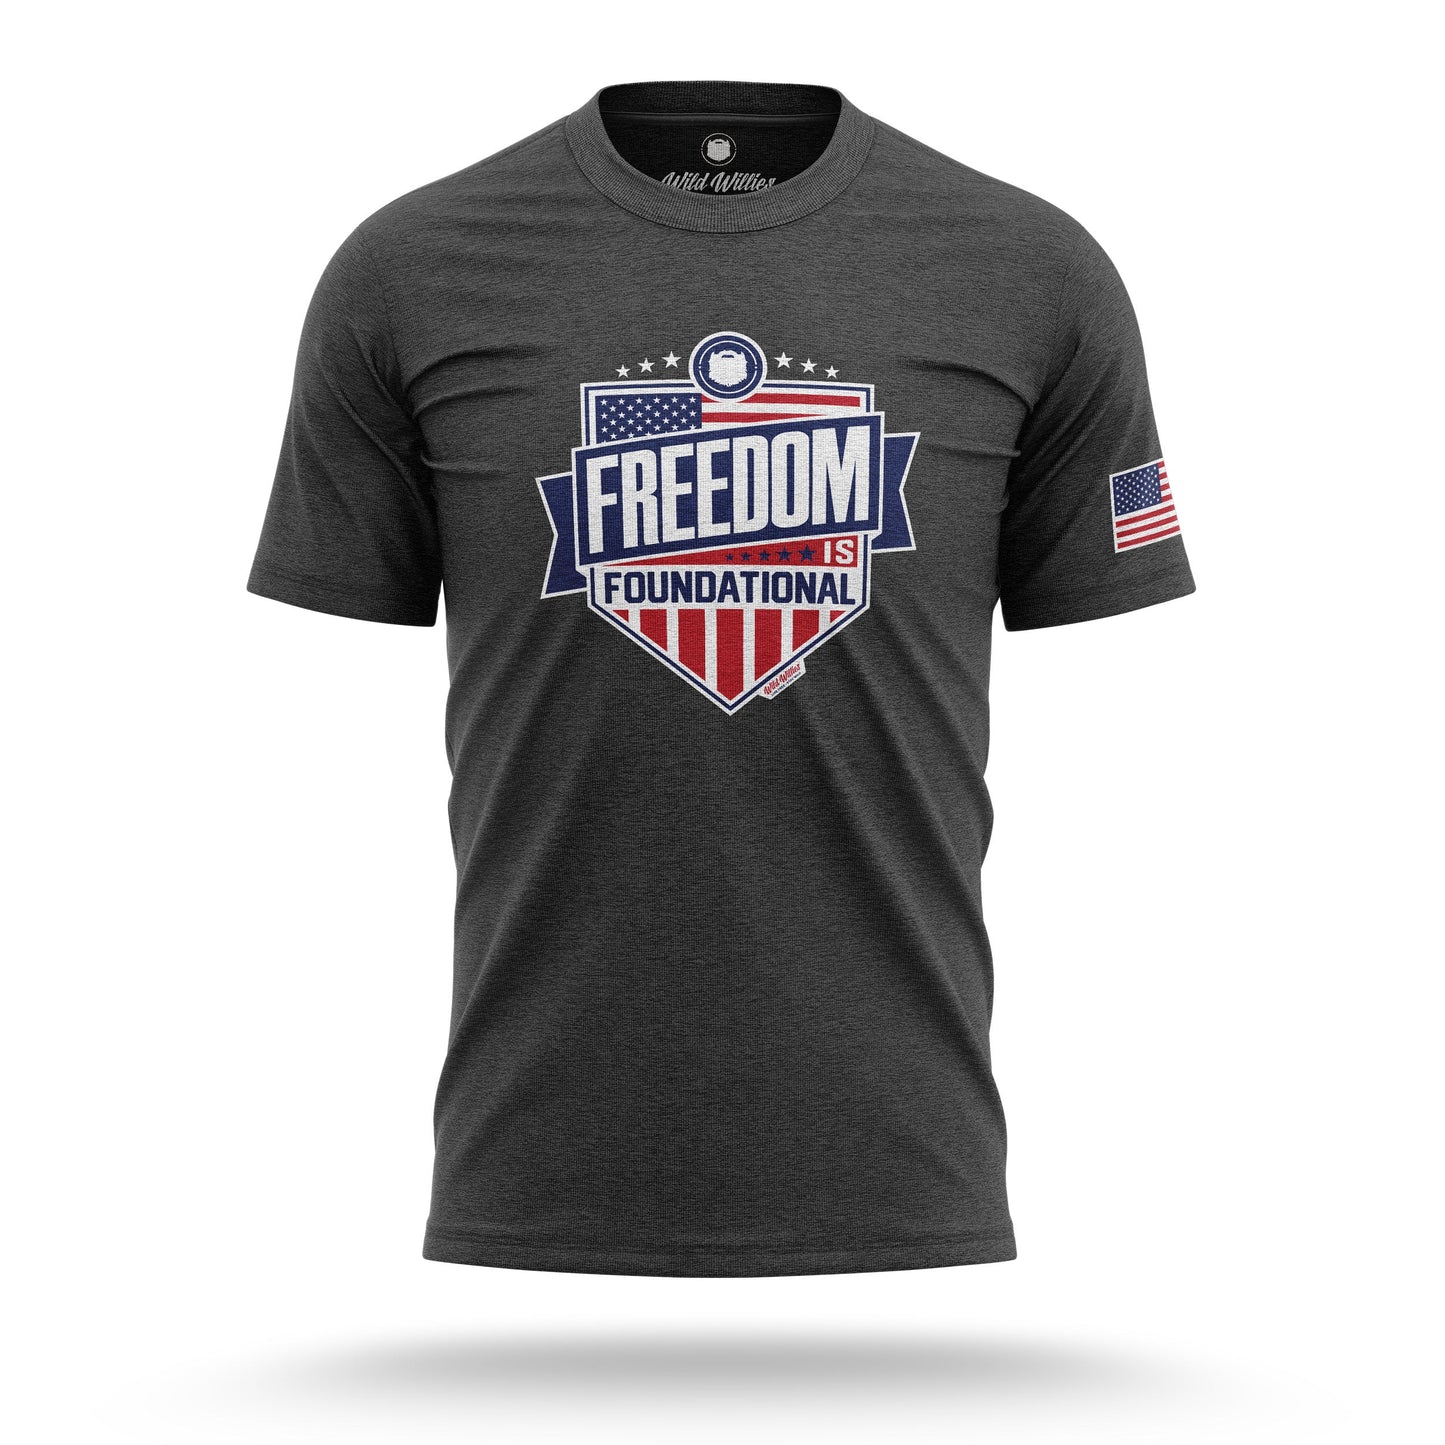 Freedom is Foundational - T-Shirt T-Shirt Wild-Willies S Charcoal 